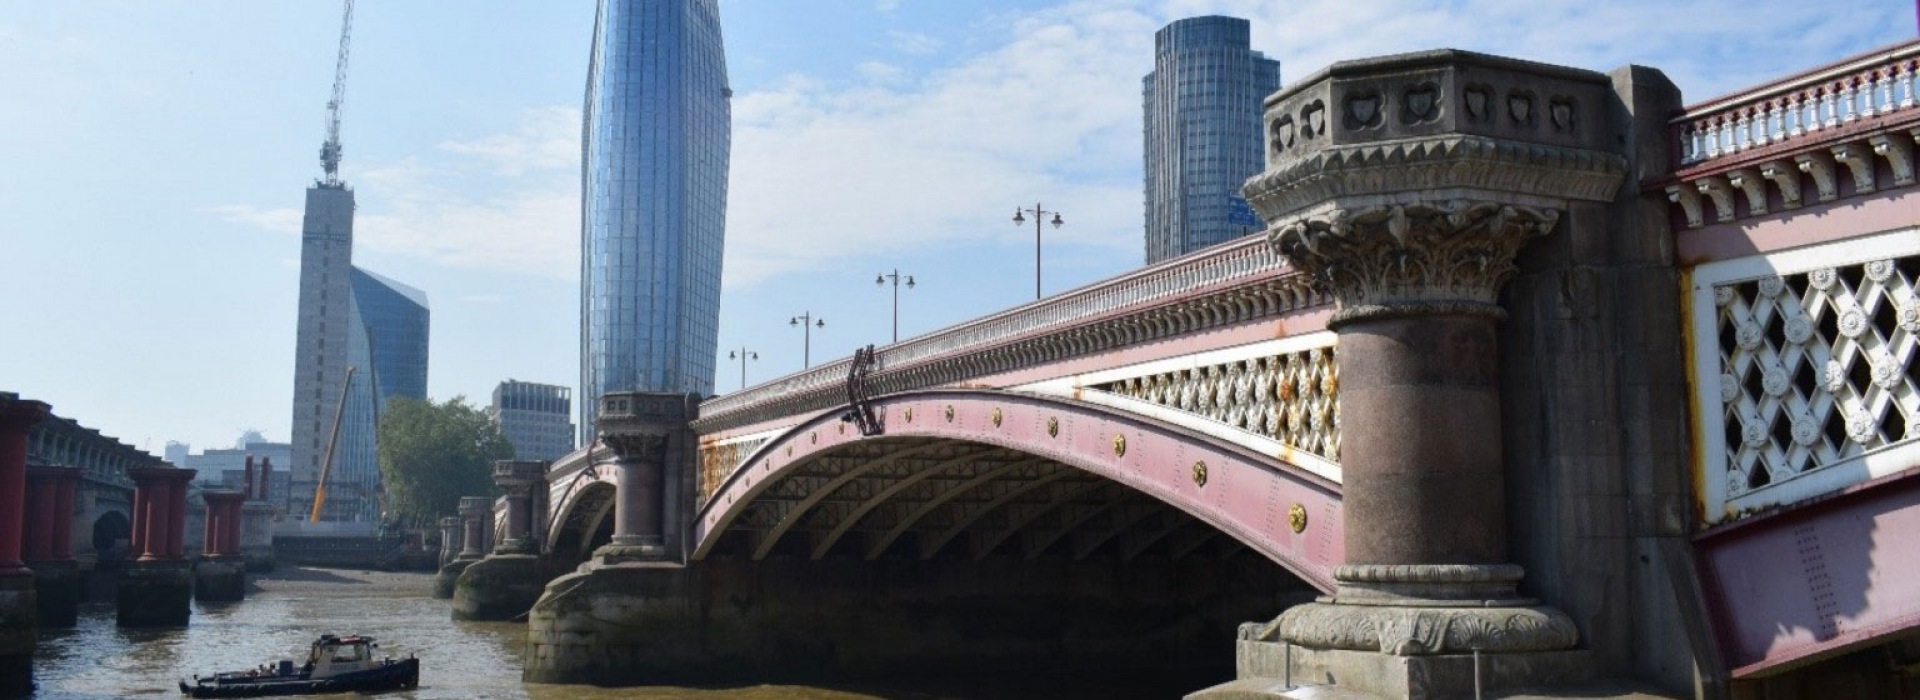 FM Conway and Taziker appointed to refurbish Blackfriars Bridge